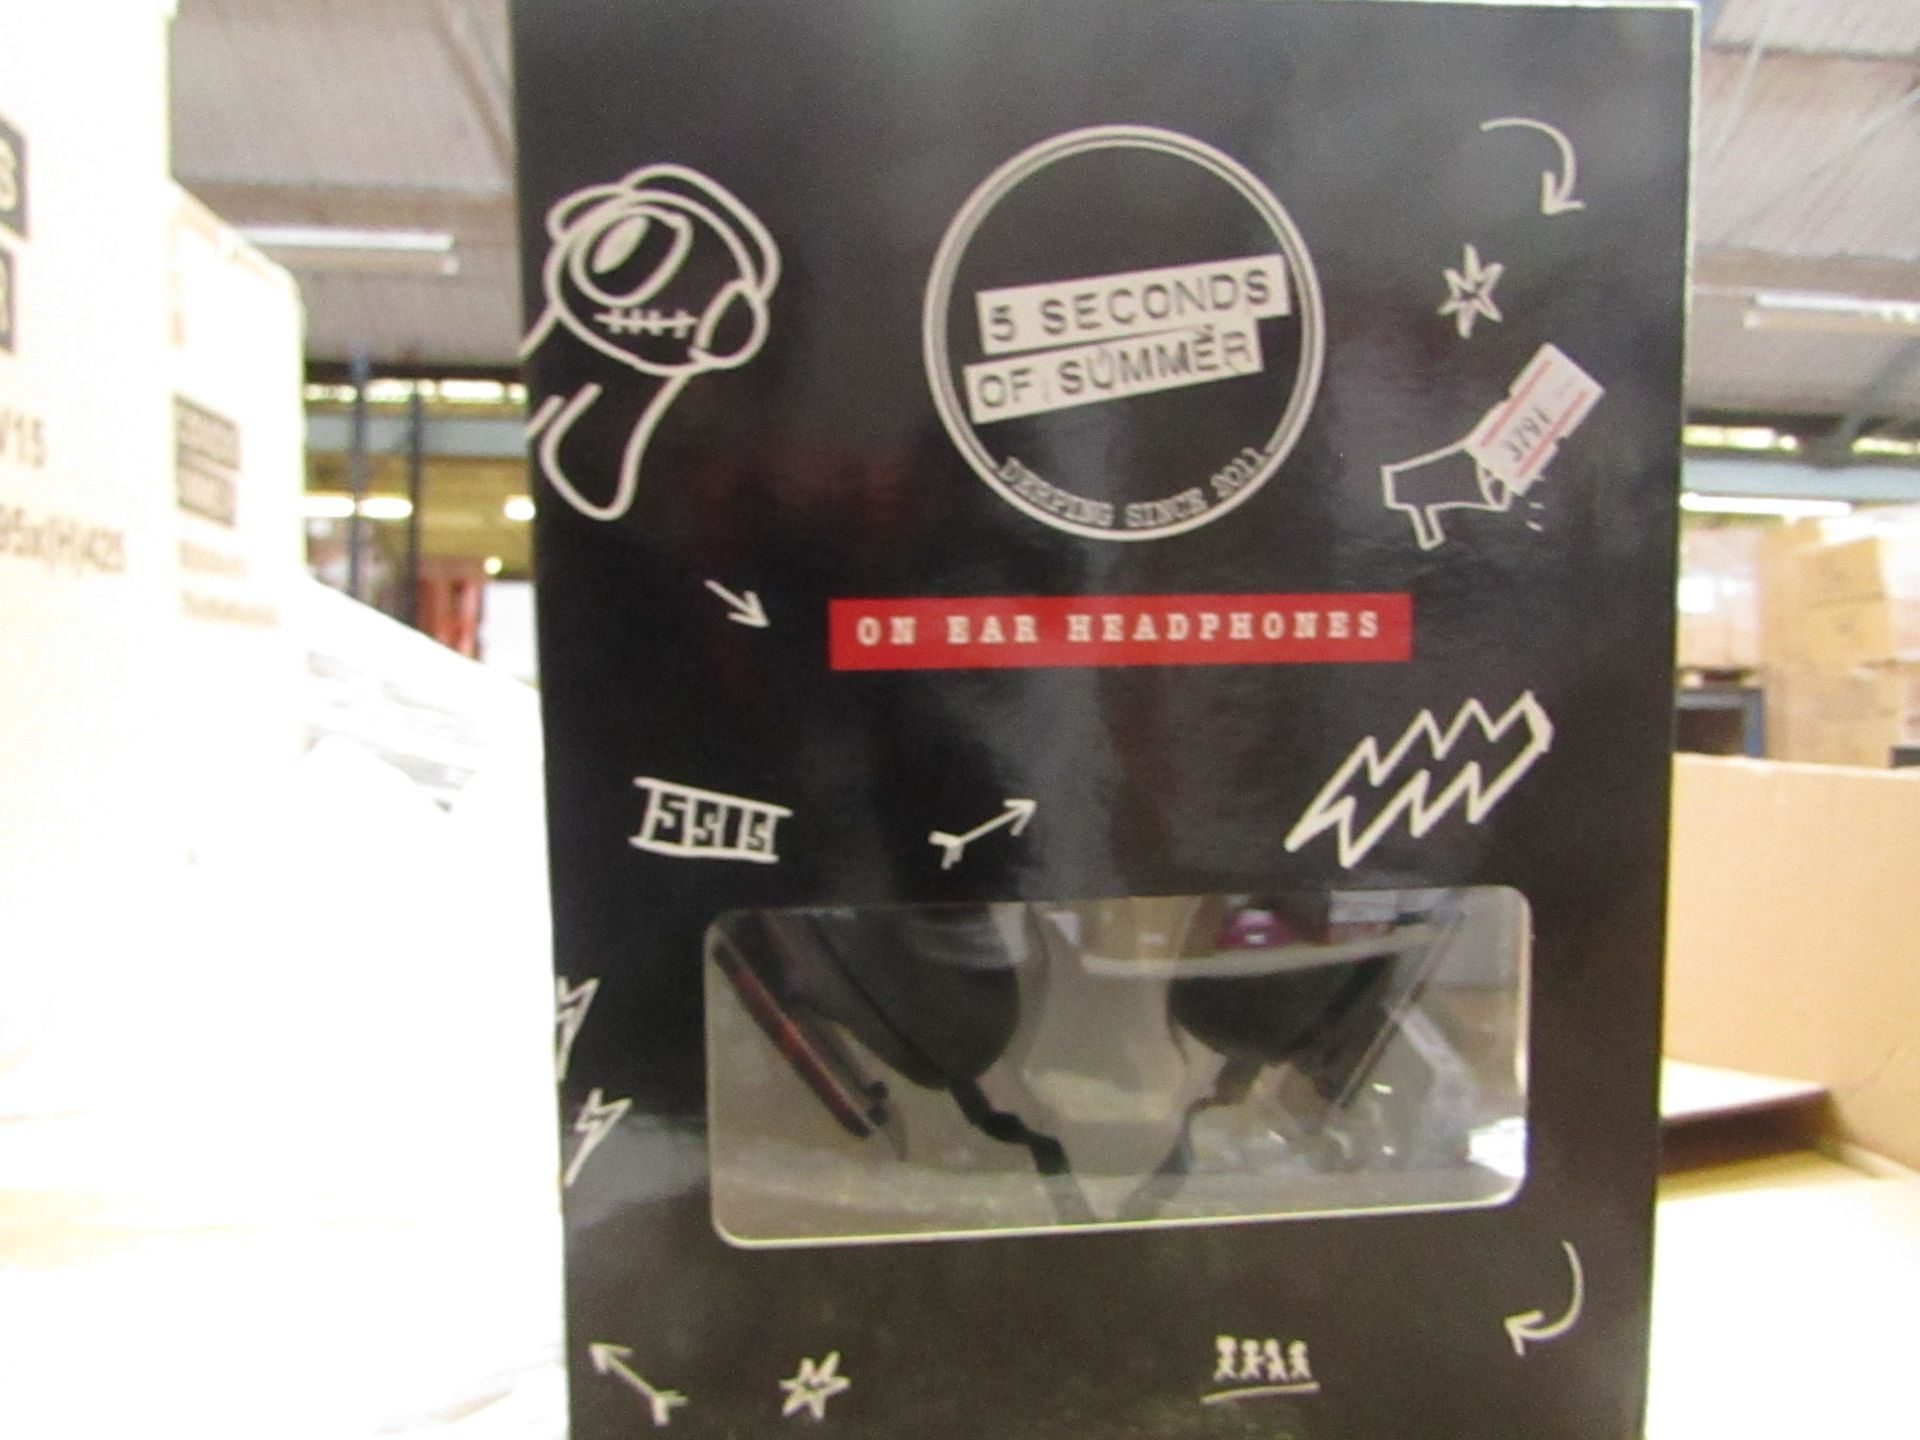 5 Seconds of Summer headphones , new and boxed.